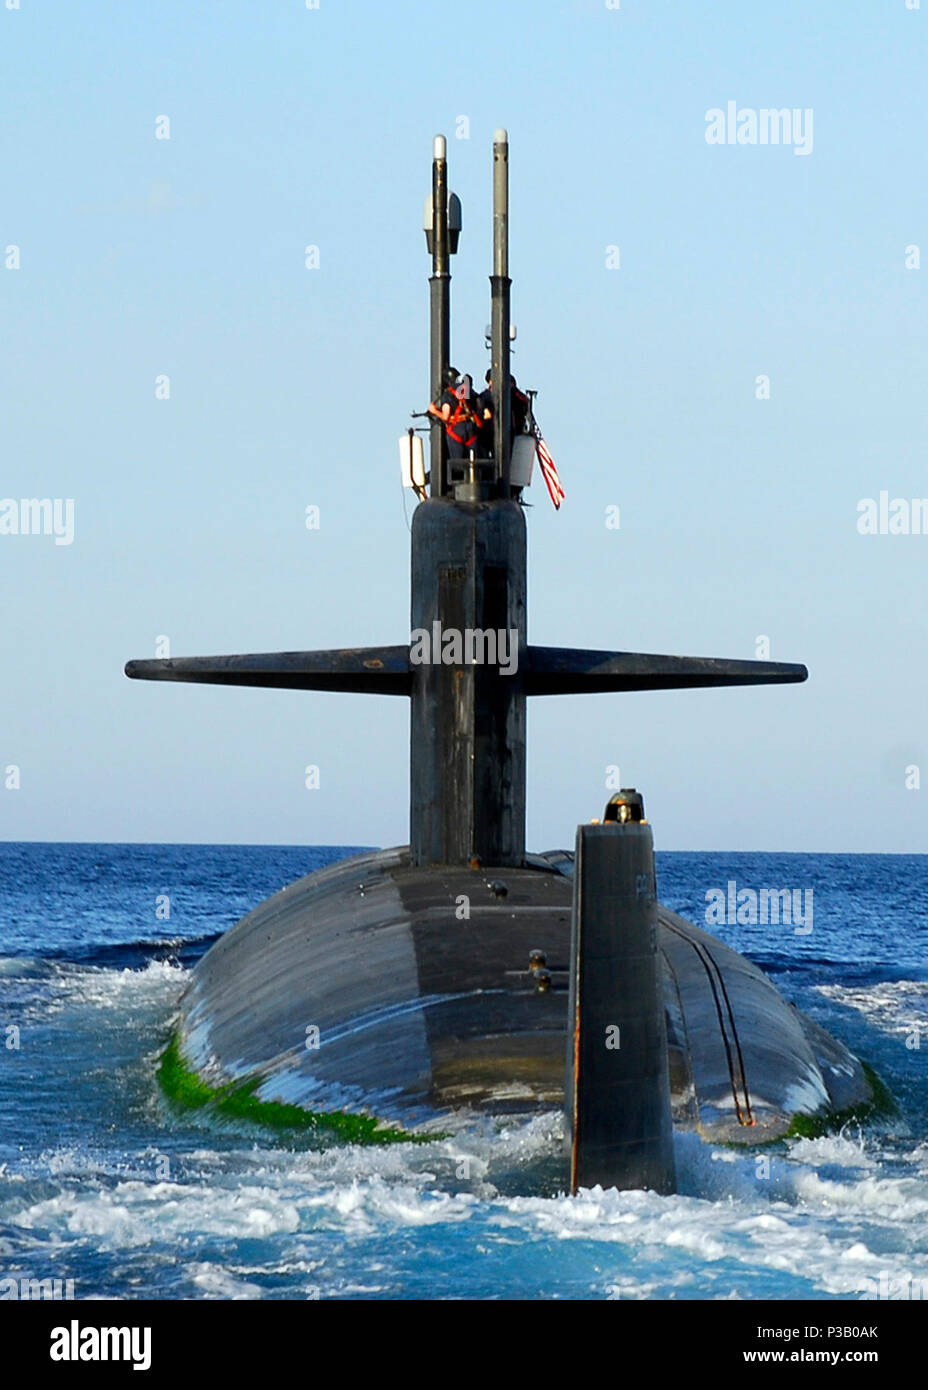 BAY, Crete (Jun 10, 2008) The Los Angeles-class fast attack submarine USS Norfolk (SSN 714) heads to sea after a routine port visit. Norfolk is on a scheduled six-month independent deployment operating in the U.S. Central Command area of responsibility. U.S. Navy Stock Photo